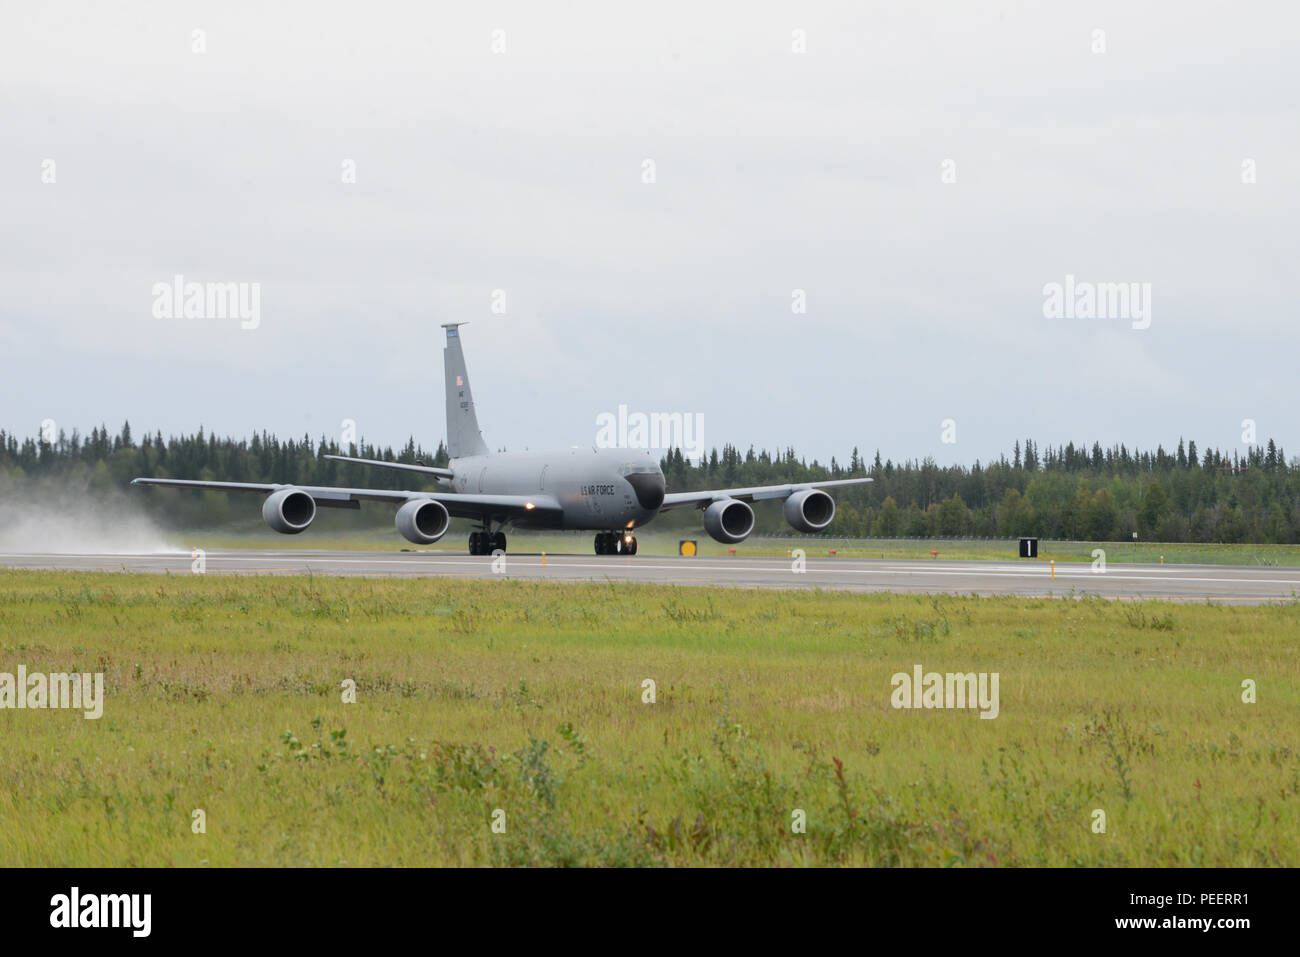 A U.S. Air Force KC-135R stratotanker assigned to the 22nd Air Refueling Wing, McConnell Air Force Base, Kan., takes off from Eielson Air Force Base, Alaska, Aug. 10, 2015, during Red  Flag-Alaska (RF-A) 15-3. RF-A is a series of Pacific Air Forces commander-directed field training exercises for U.S. and partner nation forces, providing combined offensive counter-air, interdiction, close air support and large force employment training in a simulated combat environment. (U.S. Air Force photo by Senior Airman Ashley Nicole Taylor/Released) Stock Photo